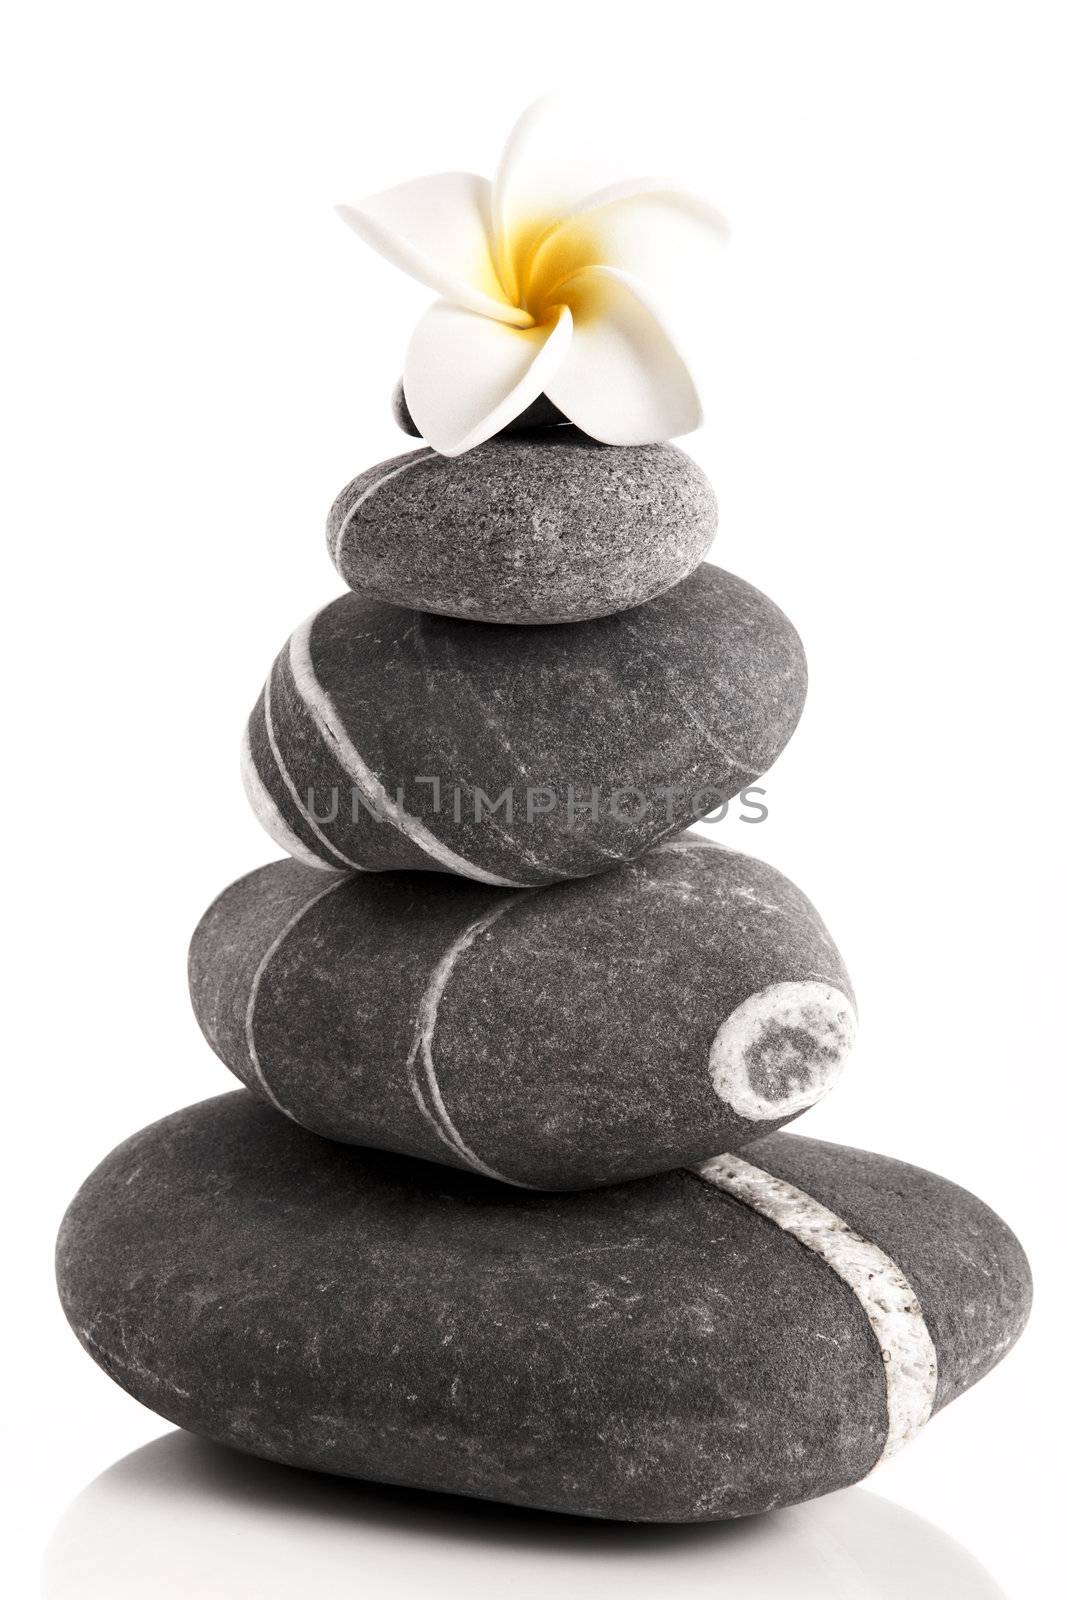 Stones pyramid with a plumeria flower, isolated on white background